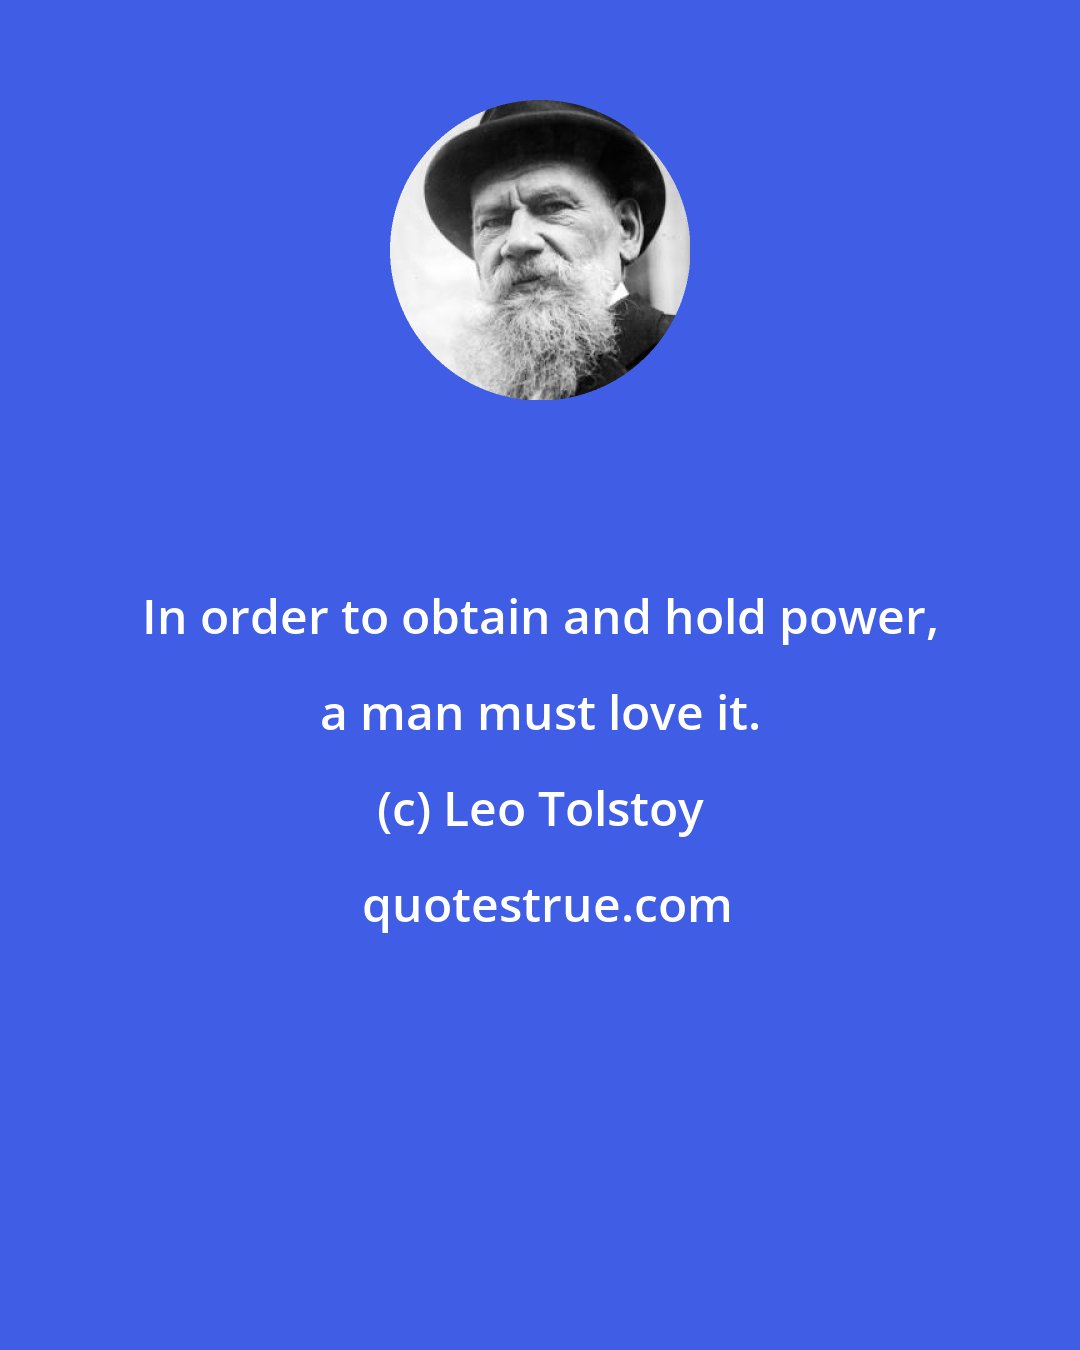 Leo Tolstoy: In order to obtain and hold power, a man must love it.